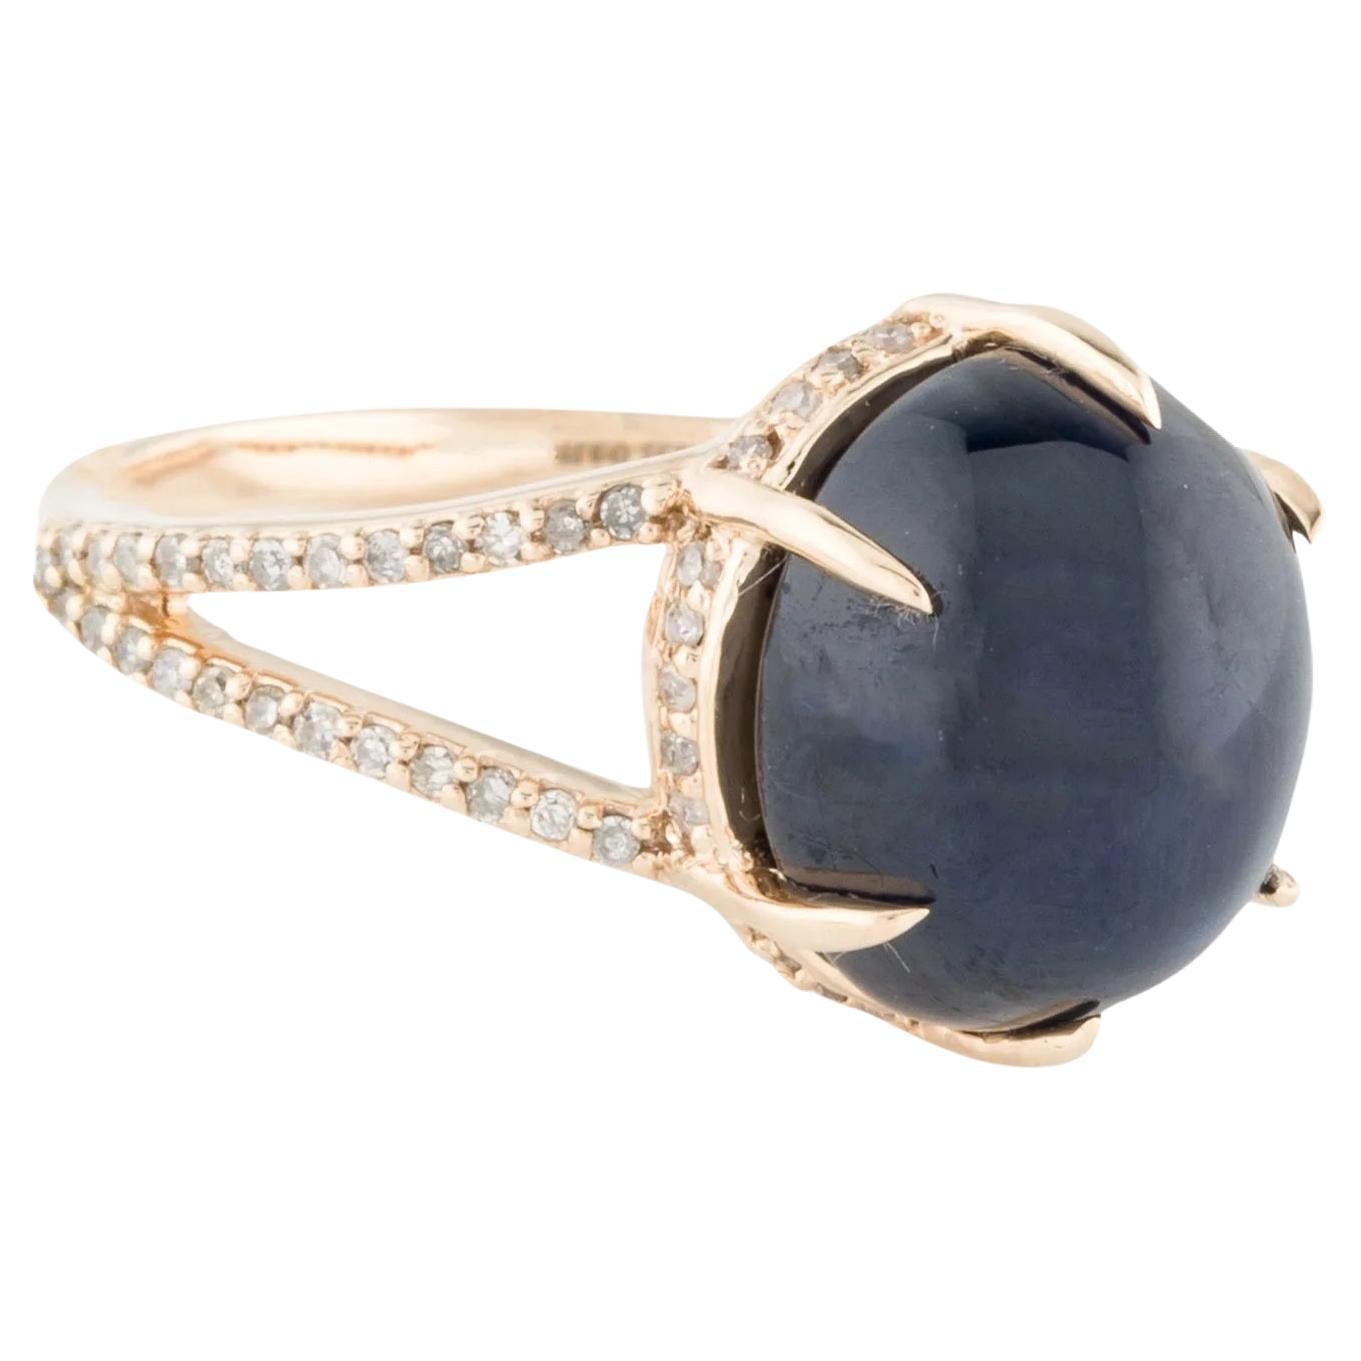 14K 10.23ct Sapphire & Diamond Cocktail Ring Size 6.75  Oval Cabochon Sapphire 